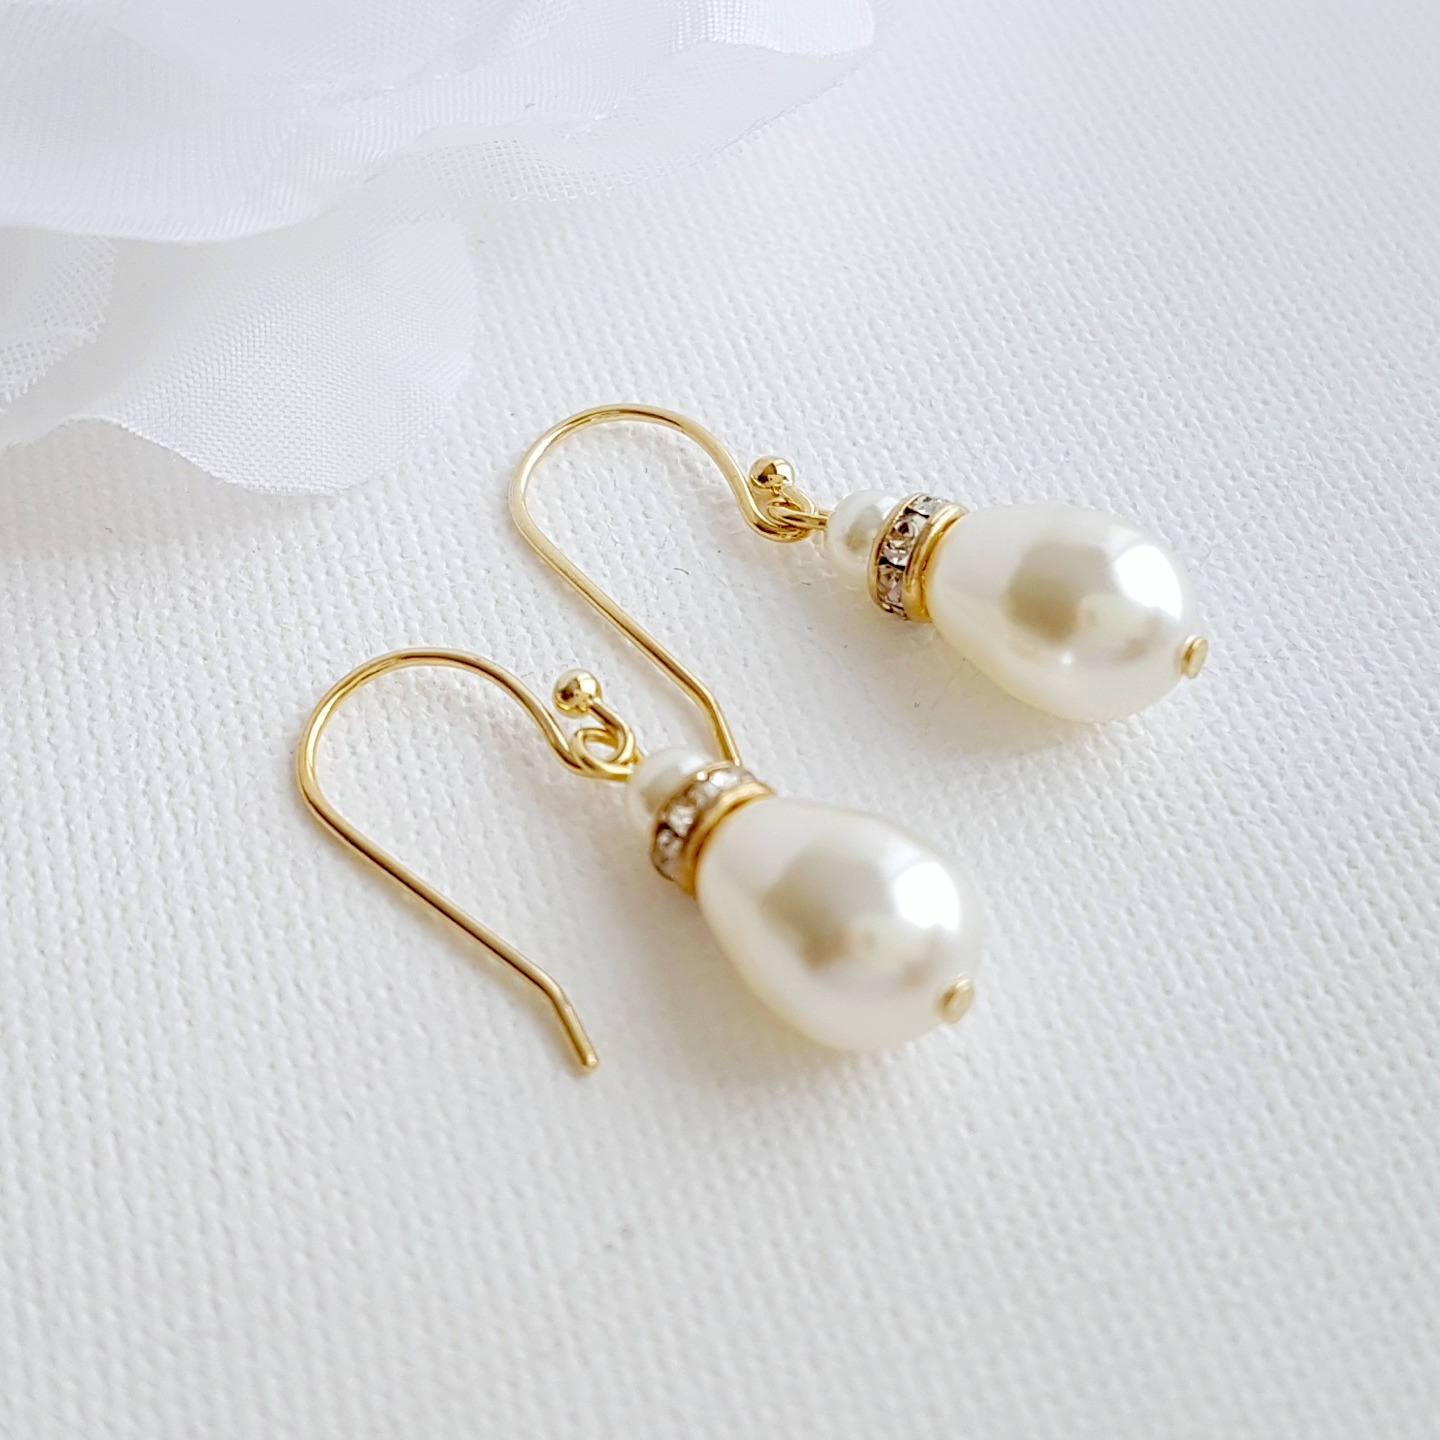 Simple Gold Earrings With Pearl Drops -June